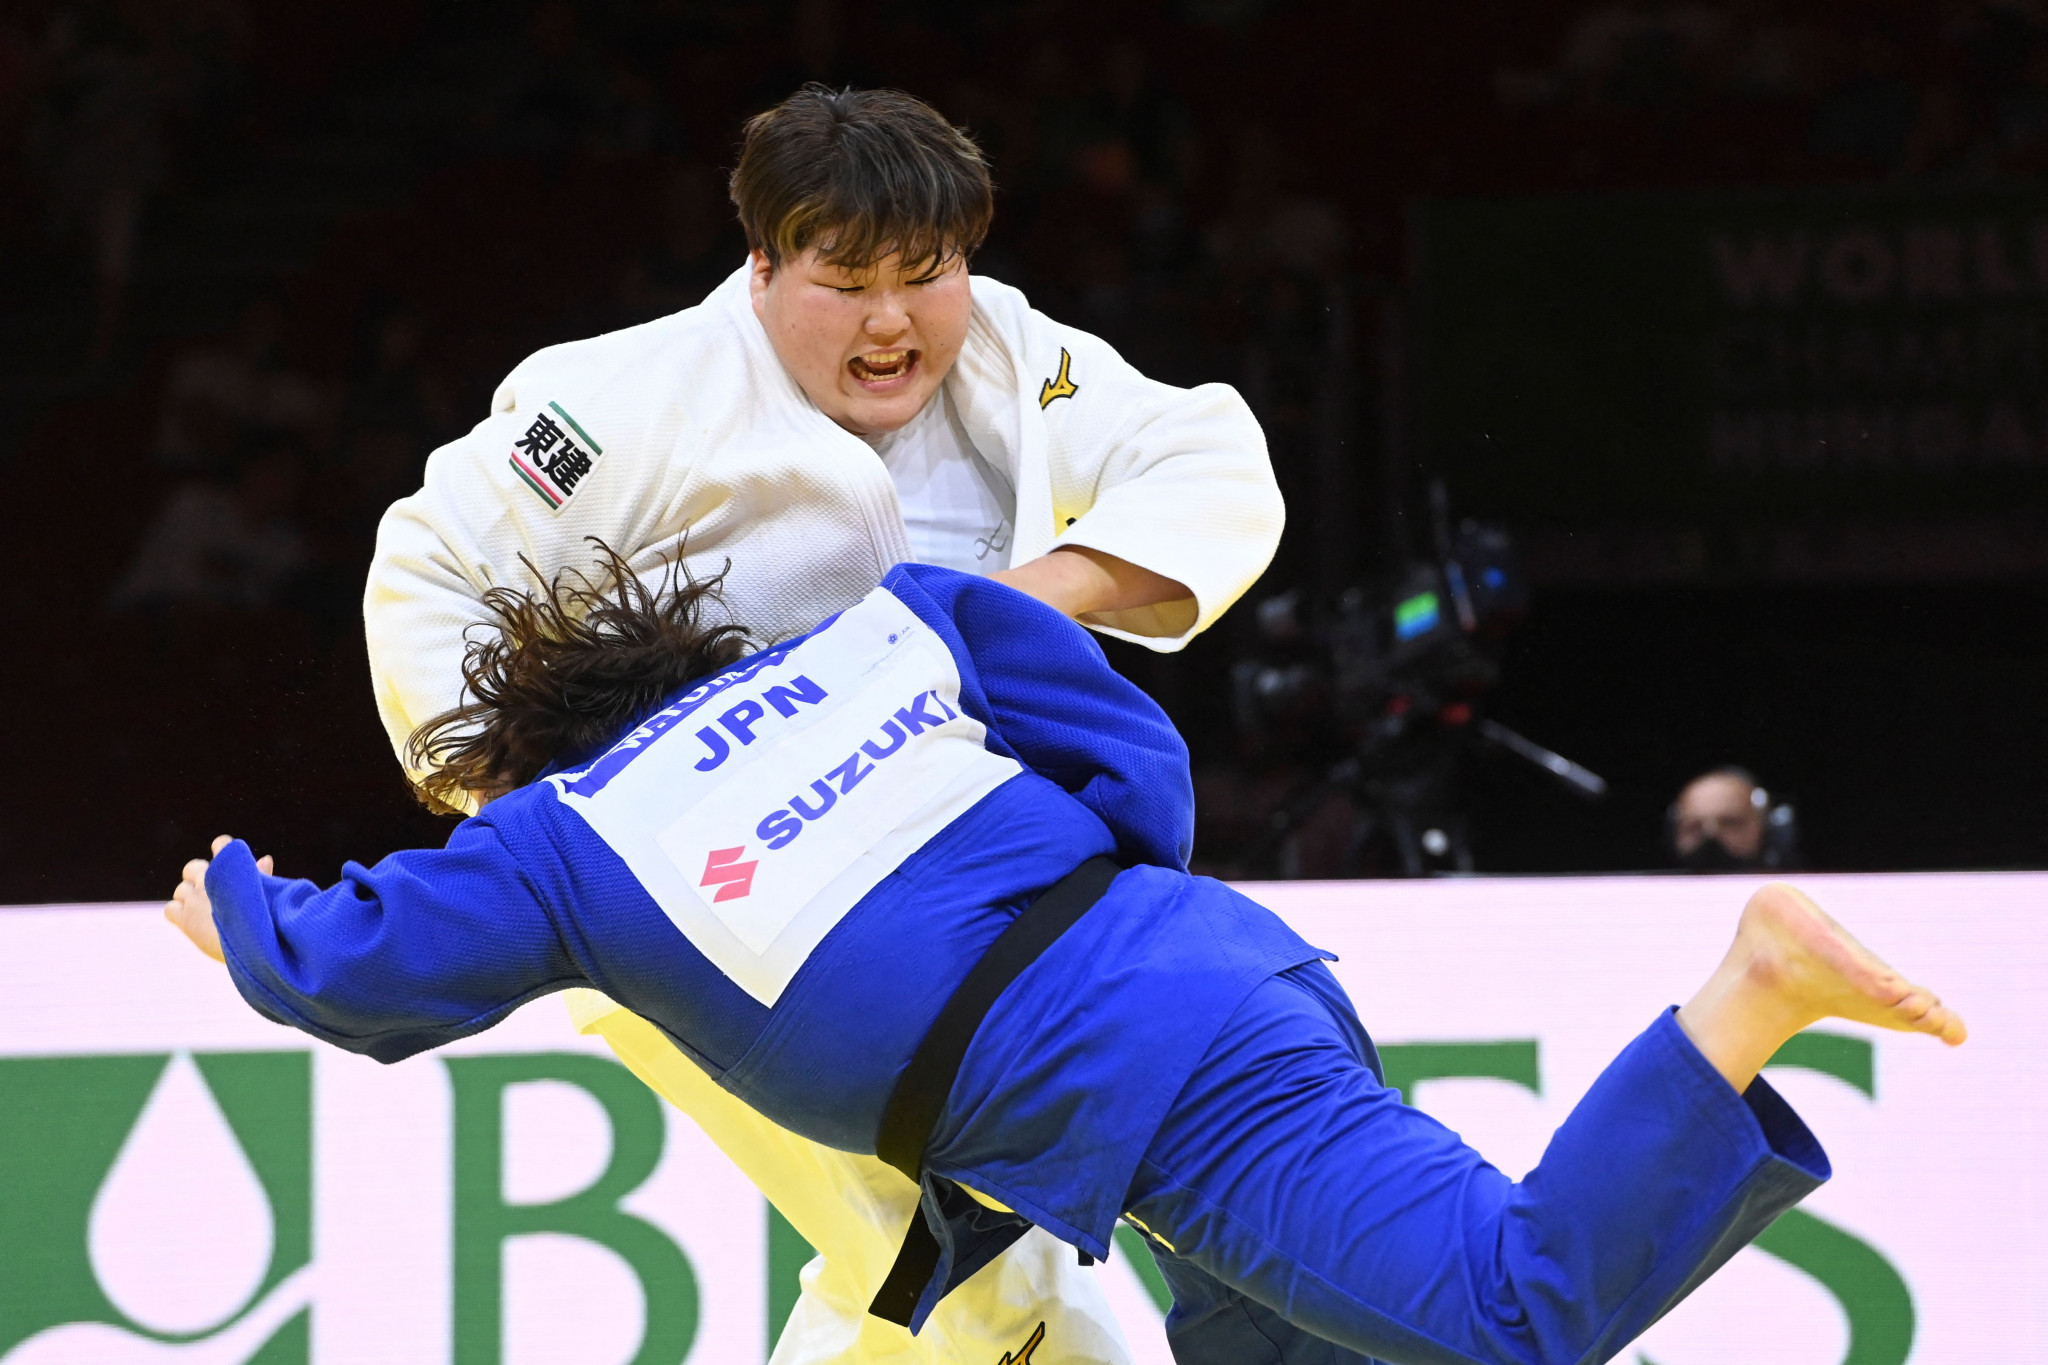 Sarah Asahina won her second gold medal at the World Judo Championships ©Getty Images